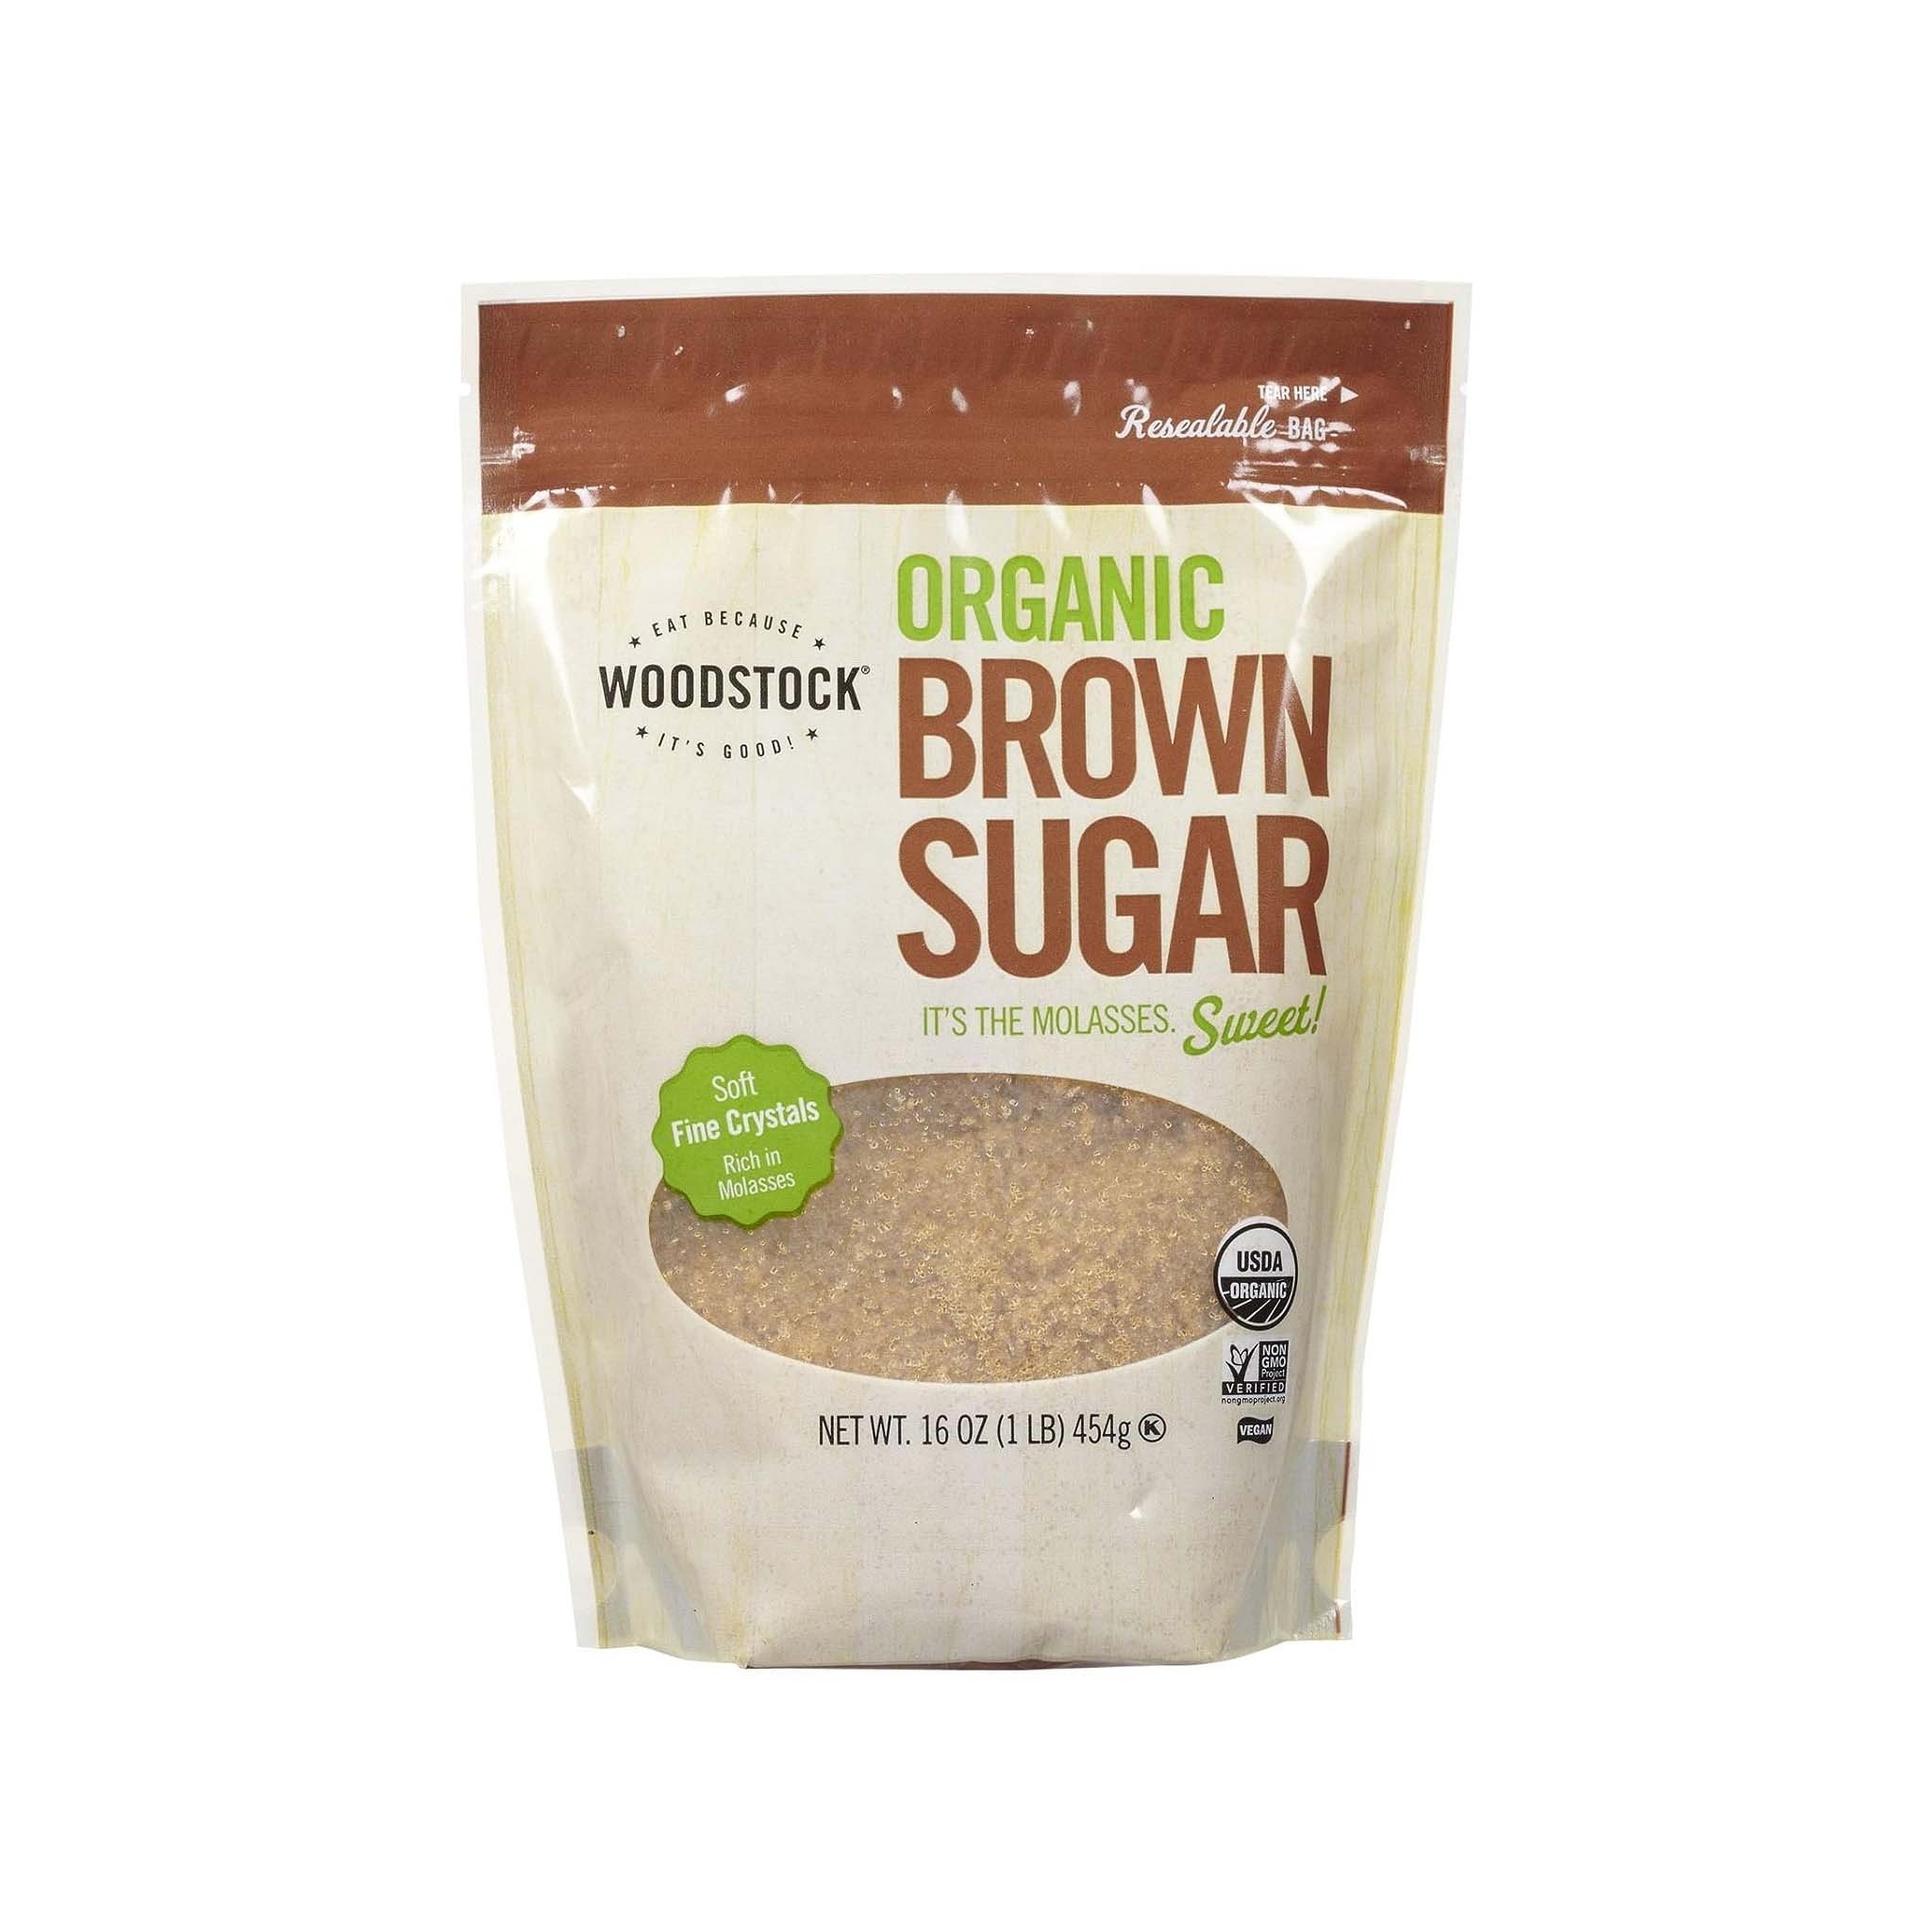 Woodstock Organic Brown Sugar is certified USDA Organic, Non-GMO Project Verified, and comes in an eco-friendly BPA-free resealable bag.